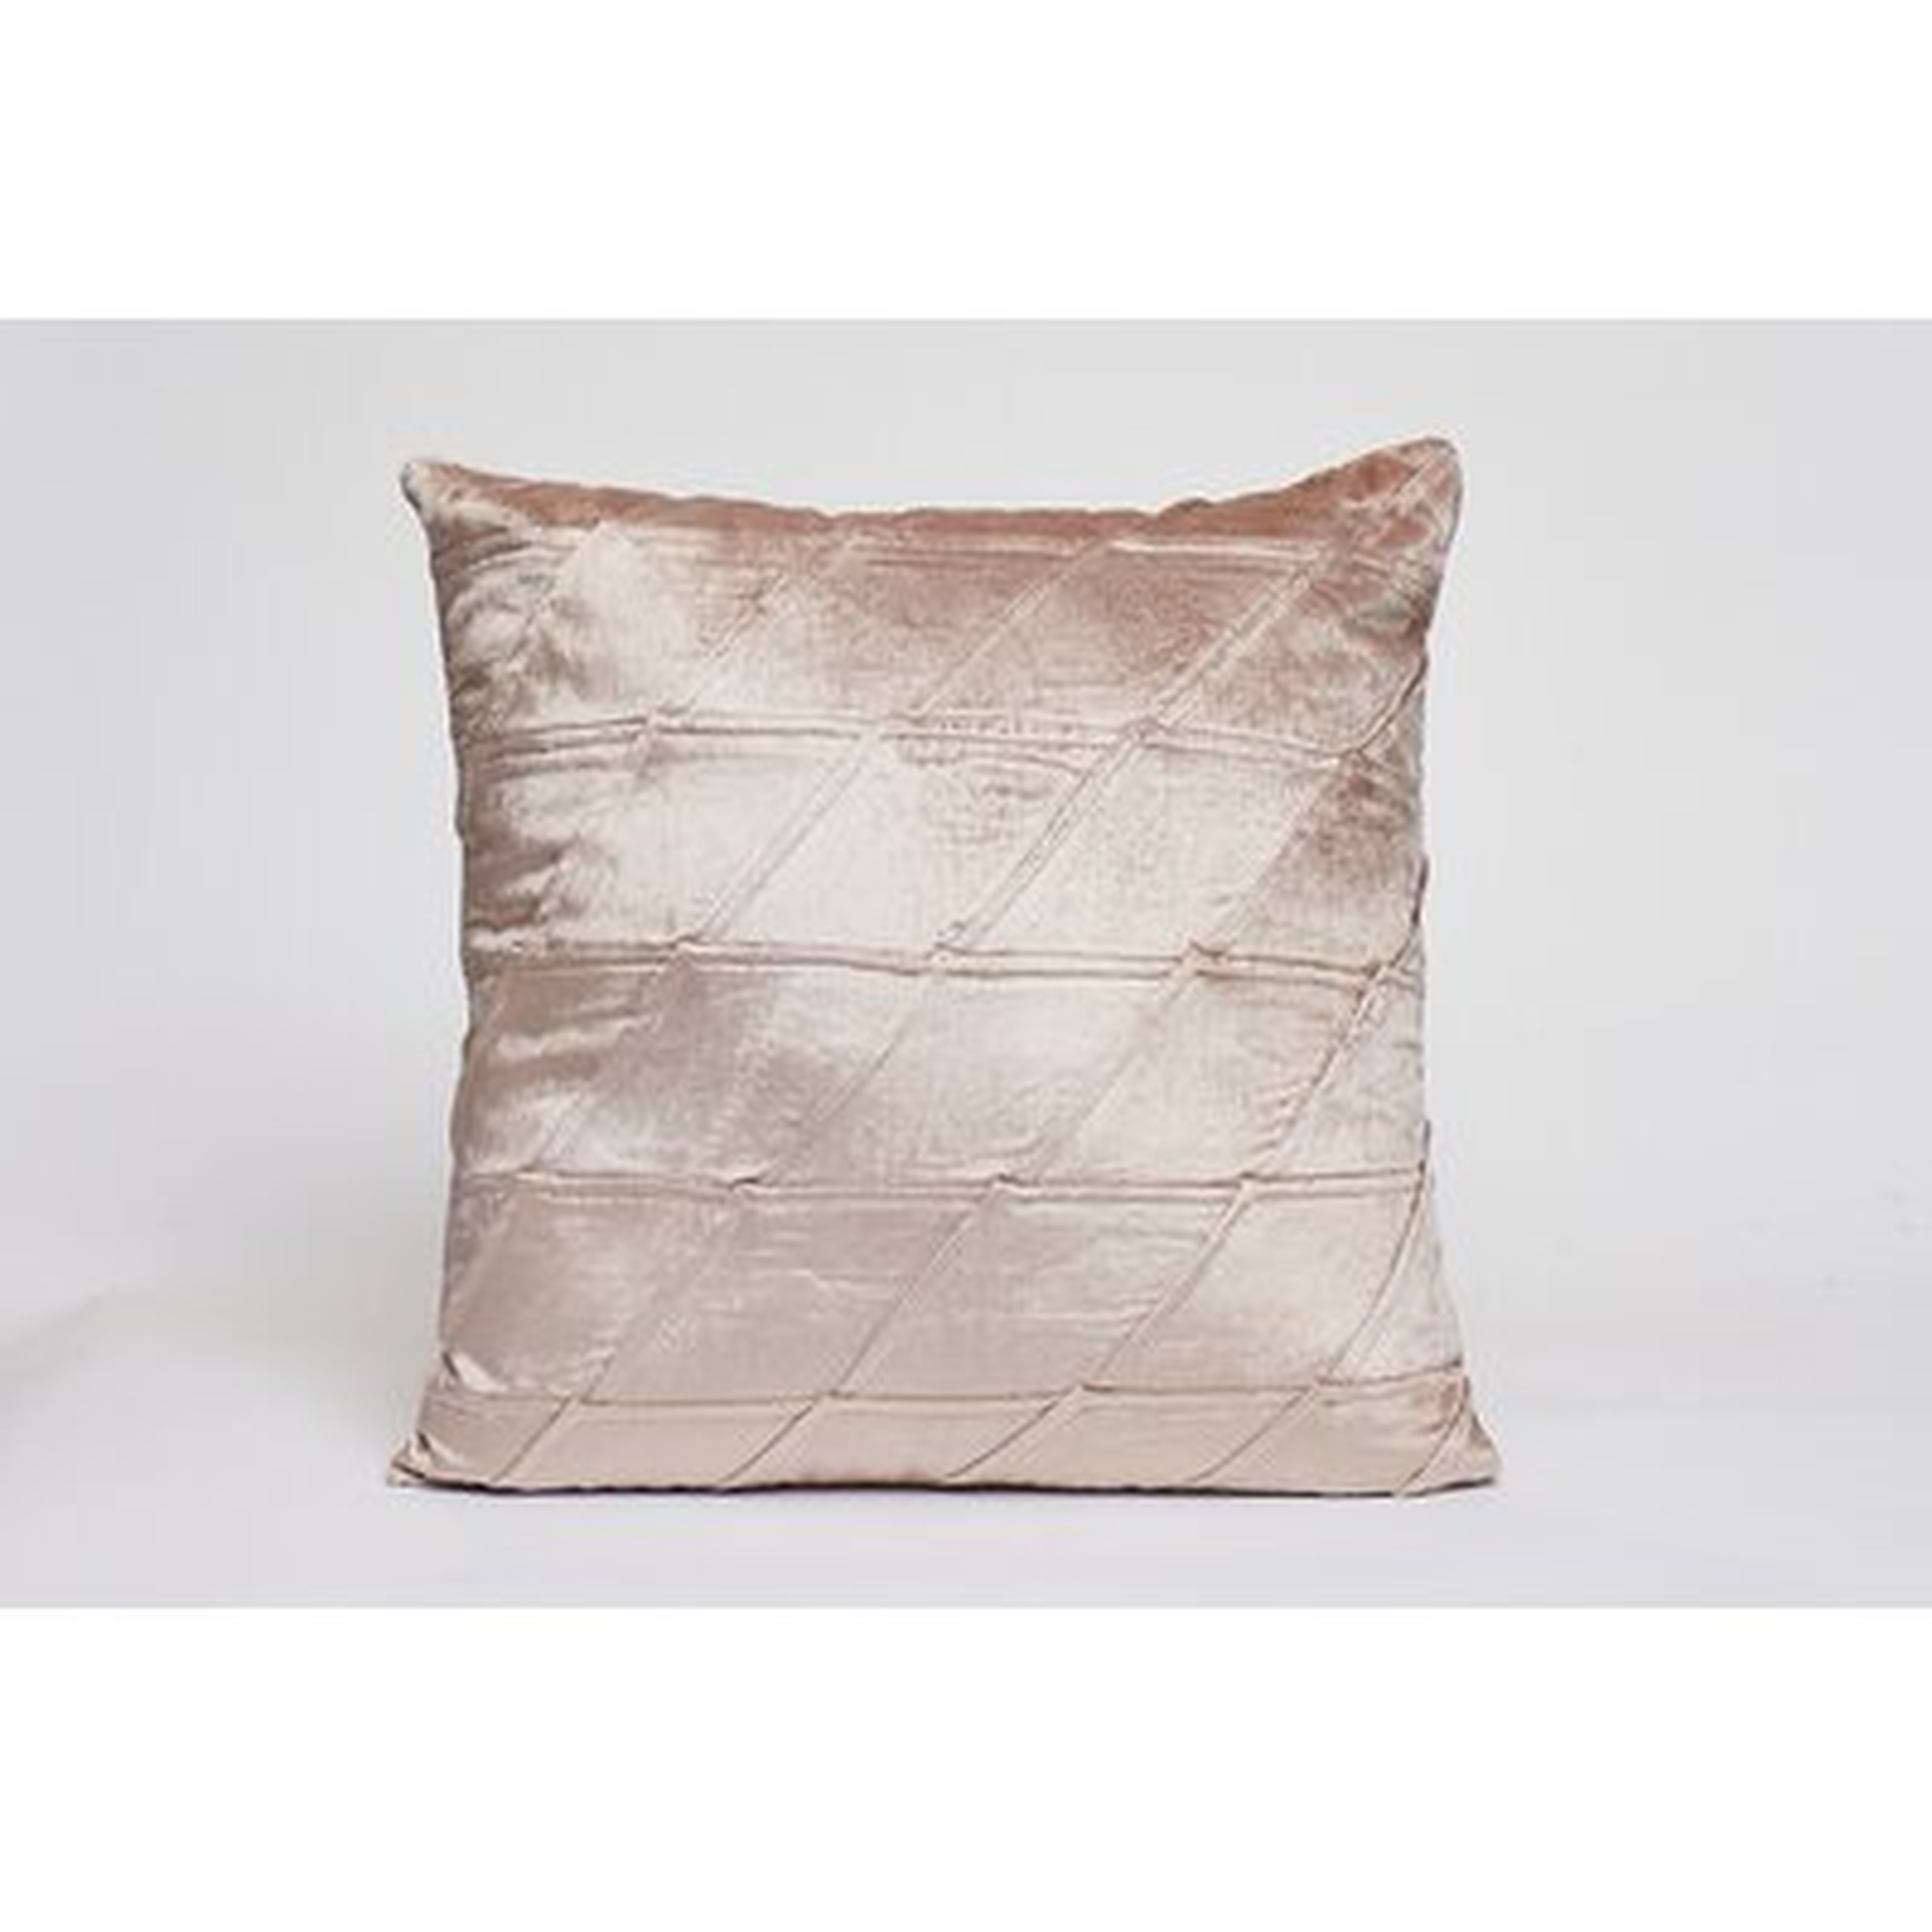 Jeske Tilted Fish Scale Square Pillow Cover & Insert - Wayfair